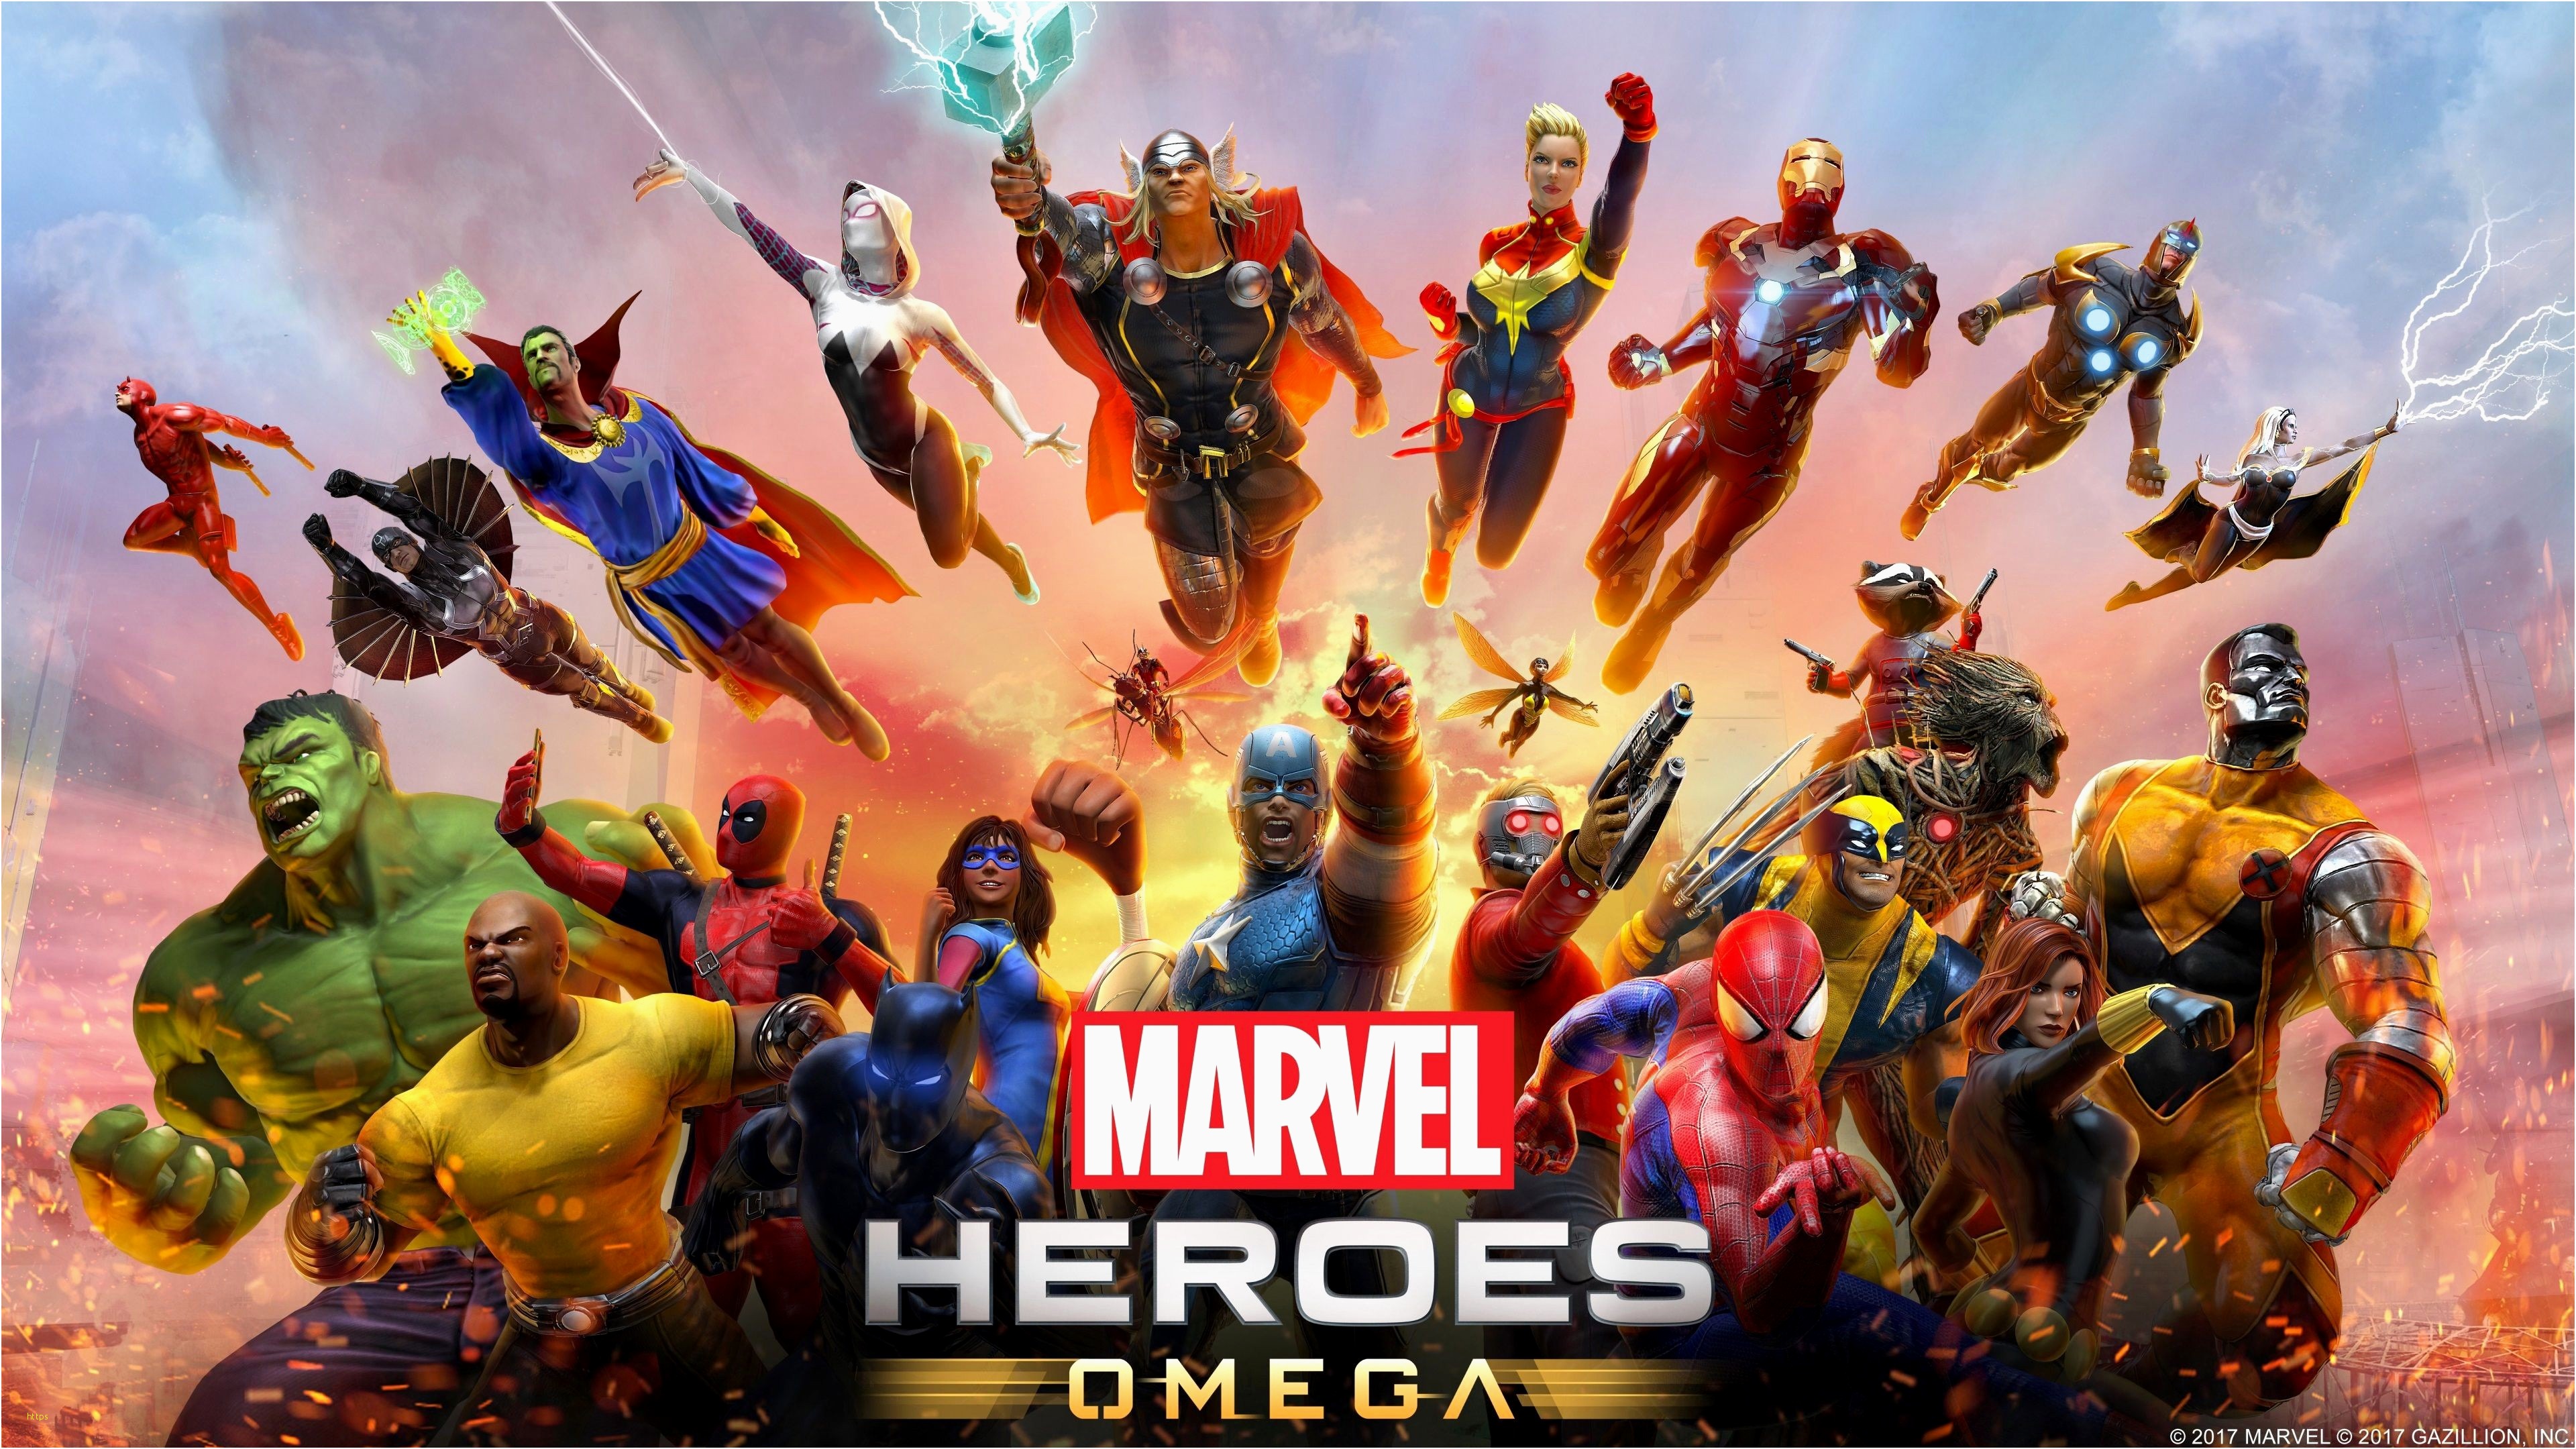 The Avengers Wallpaper Best Of Home Movie Wallpaper - Marvel Heroes Omega Ps4 , HD Wallpaper & Backgrounds